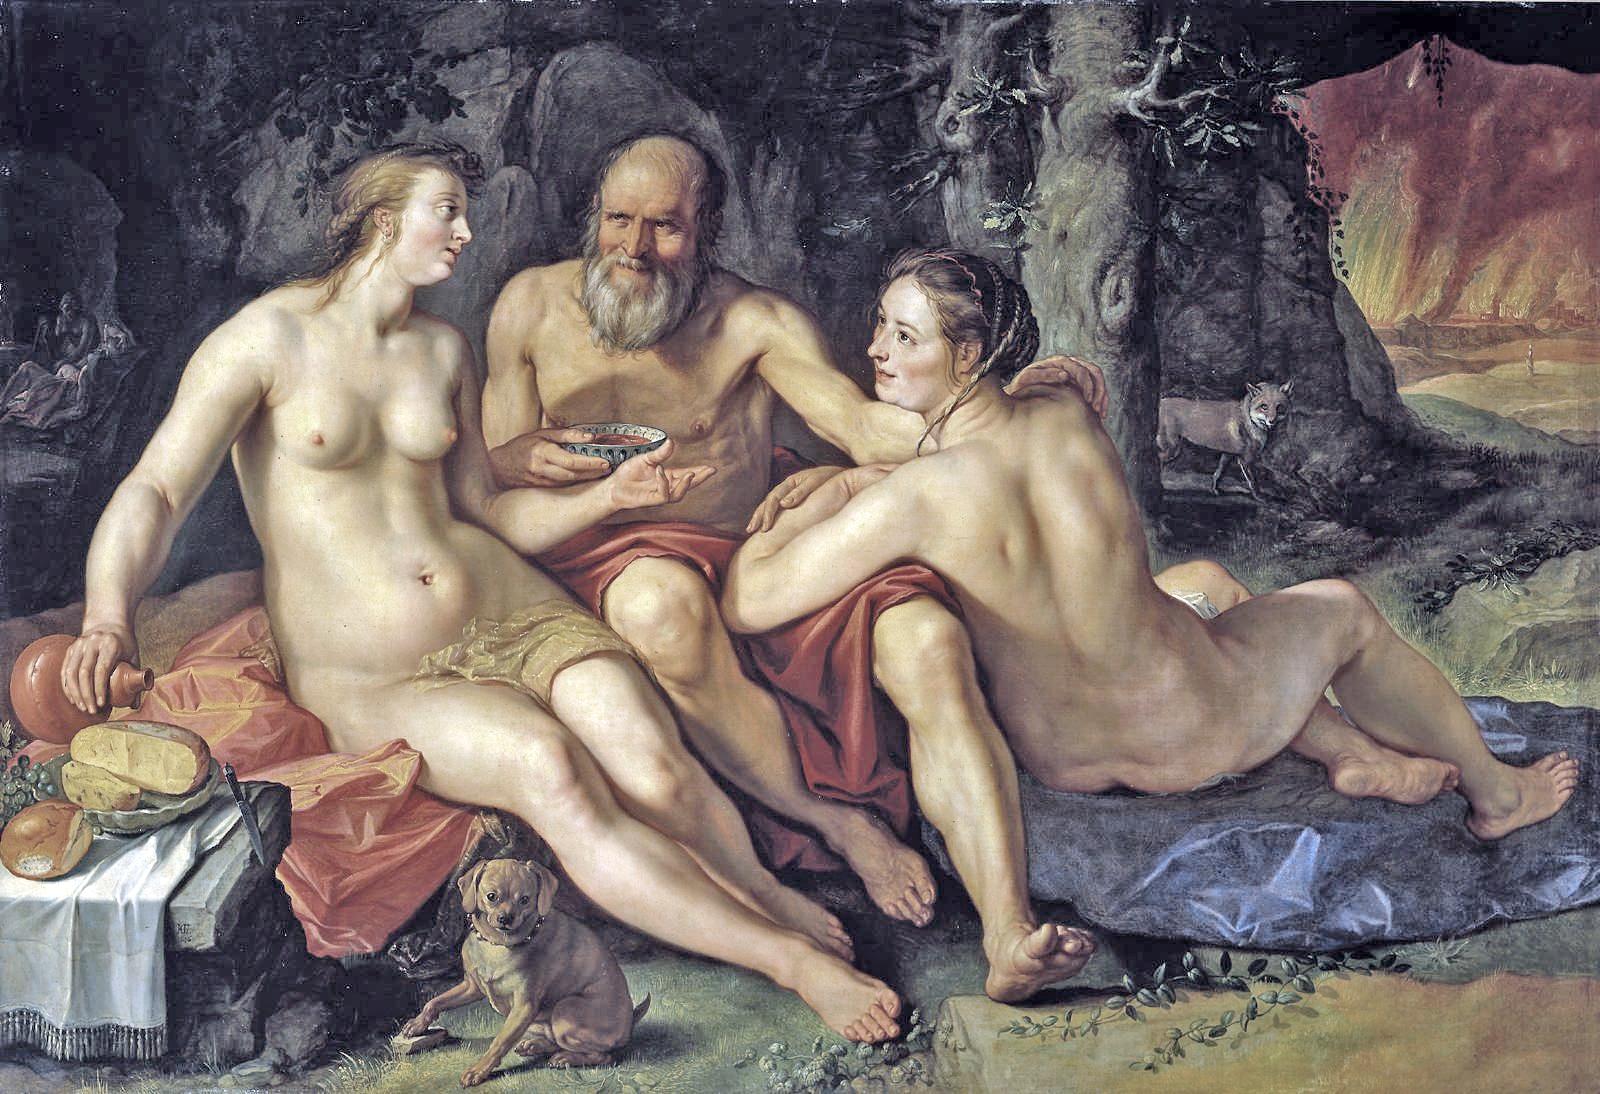 Lot and his daughters (1616 oil on canvas by Dutch artist Hendrik Goltzius)